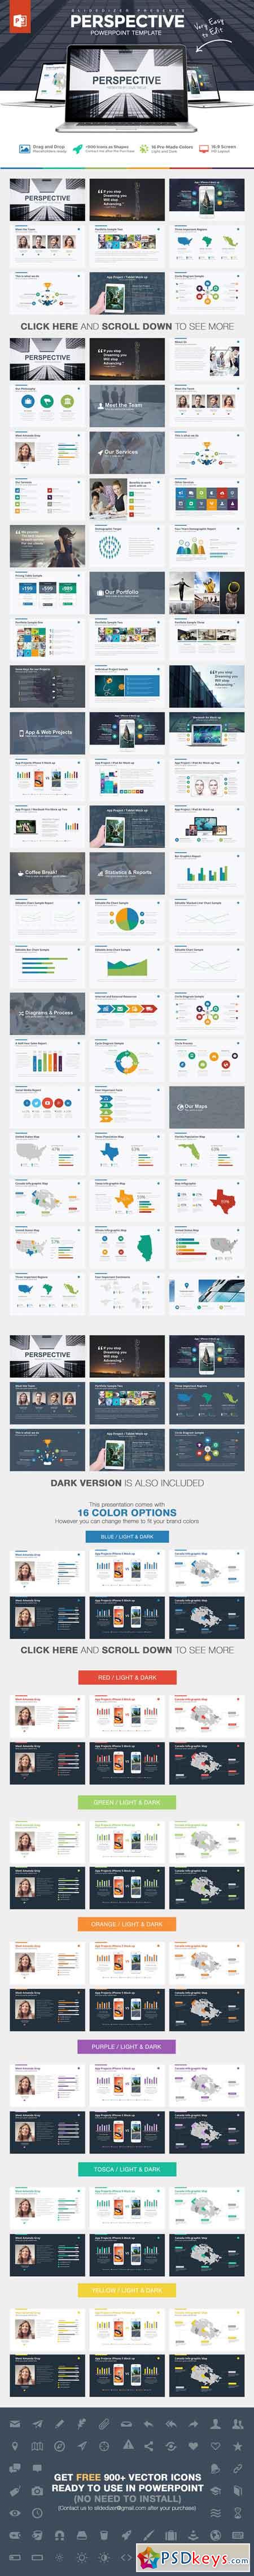 Perspective Powerpoint Template 514973